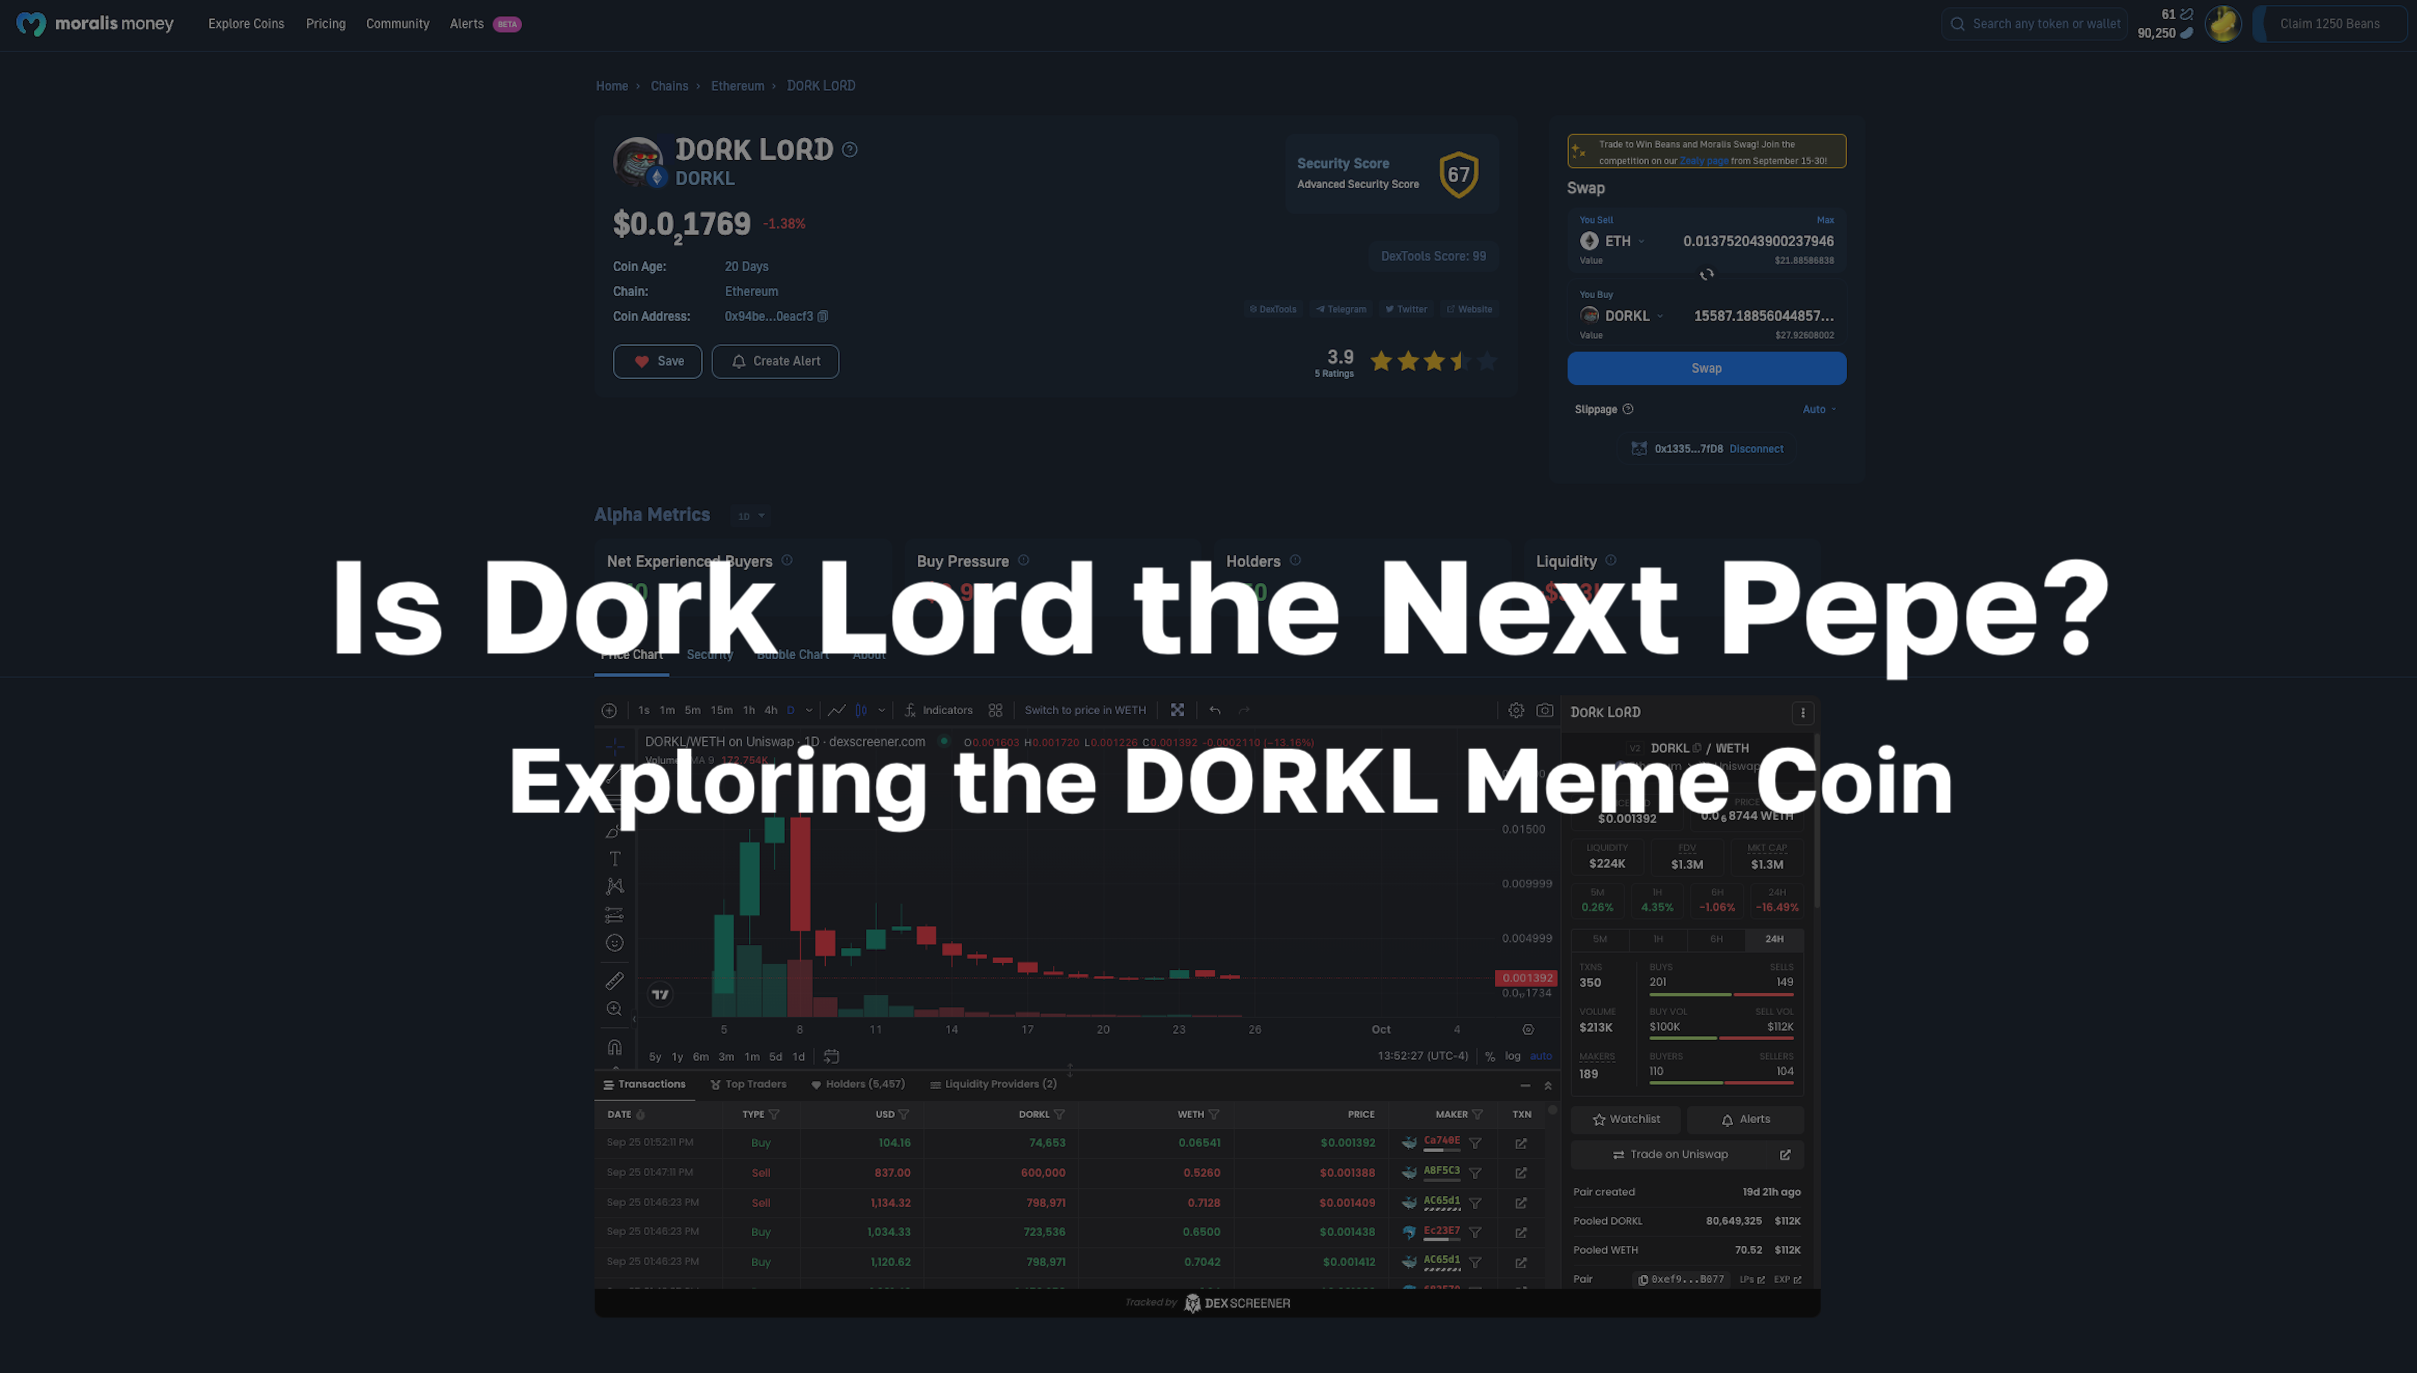 Is Dork Lord the Next Pepe? Exploring the DORKL Meme Coin